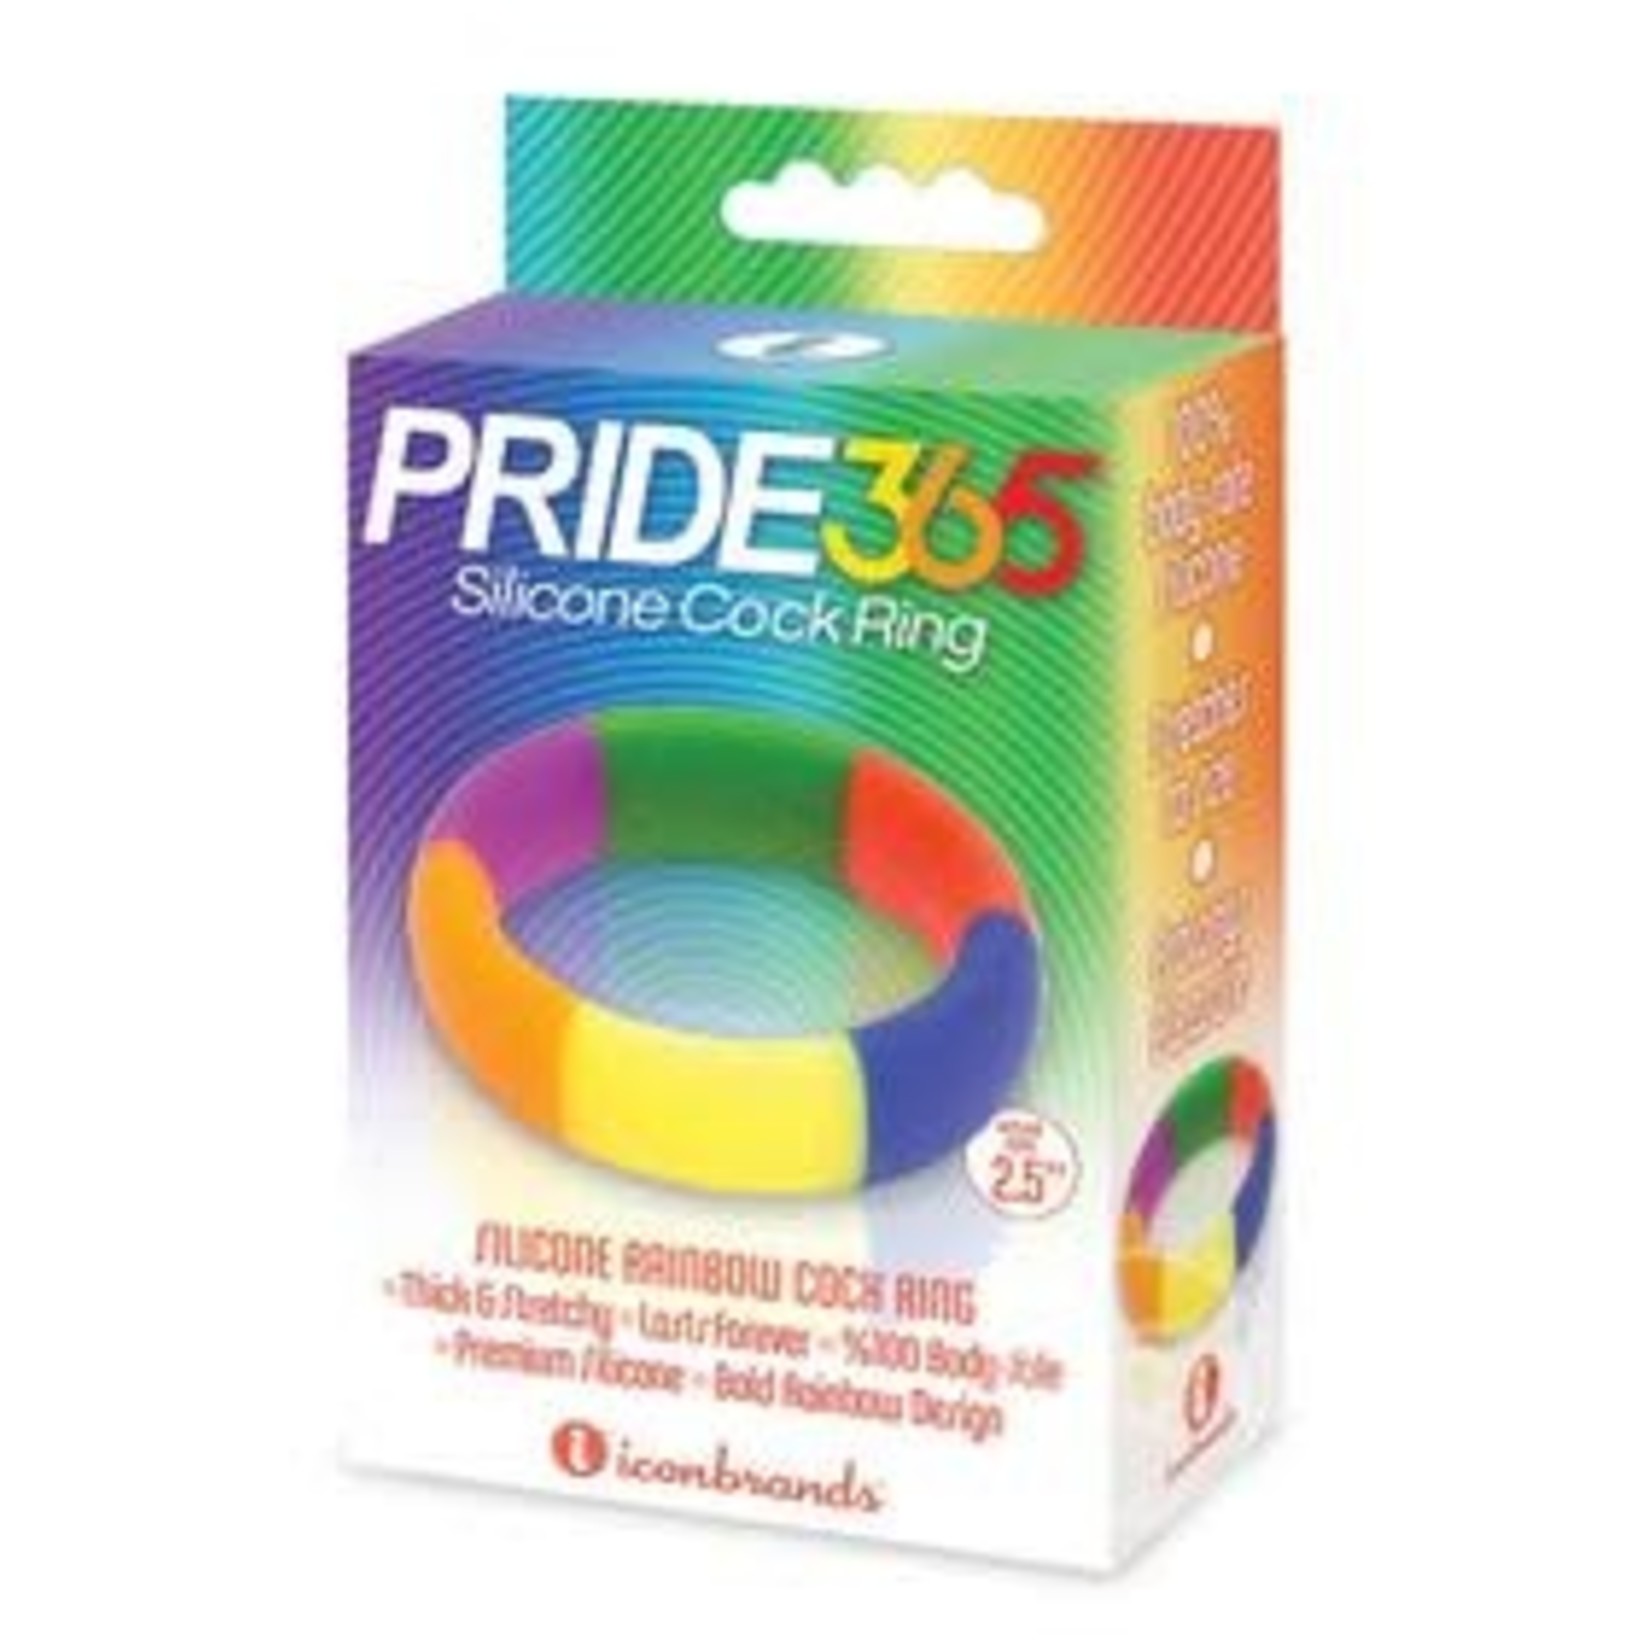 The 9's - Pride 365 Silicone Cock Ring - Rainbow